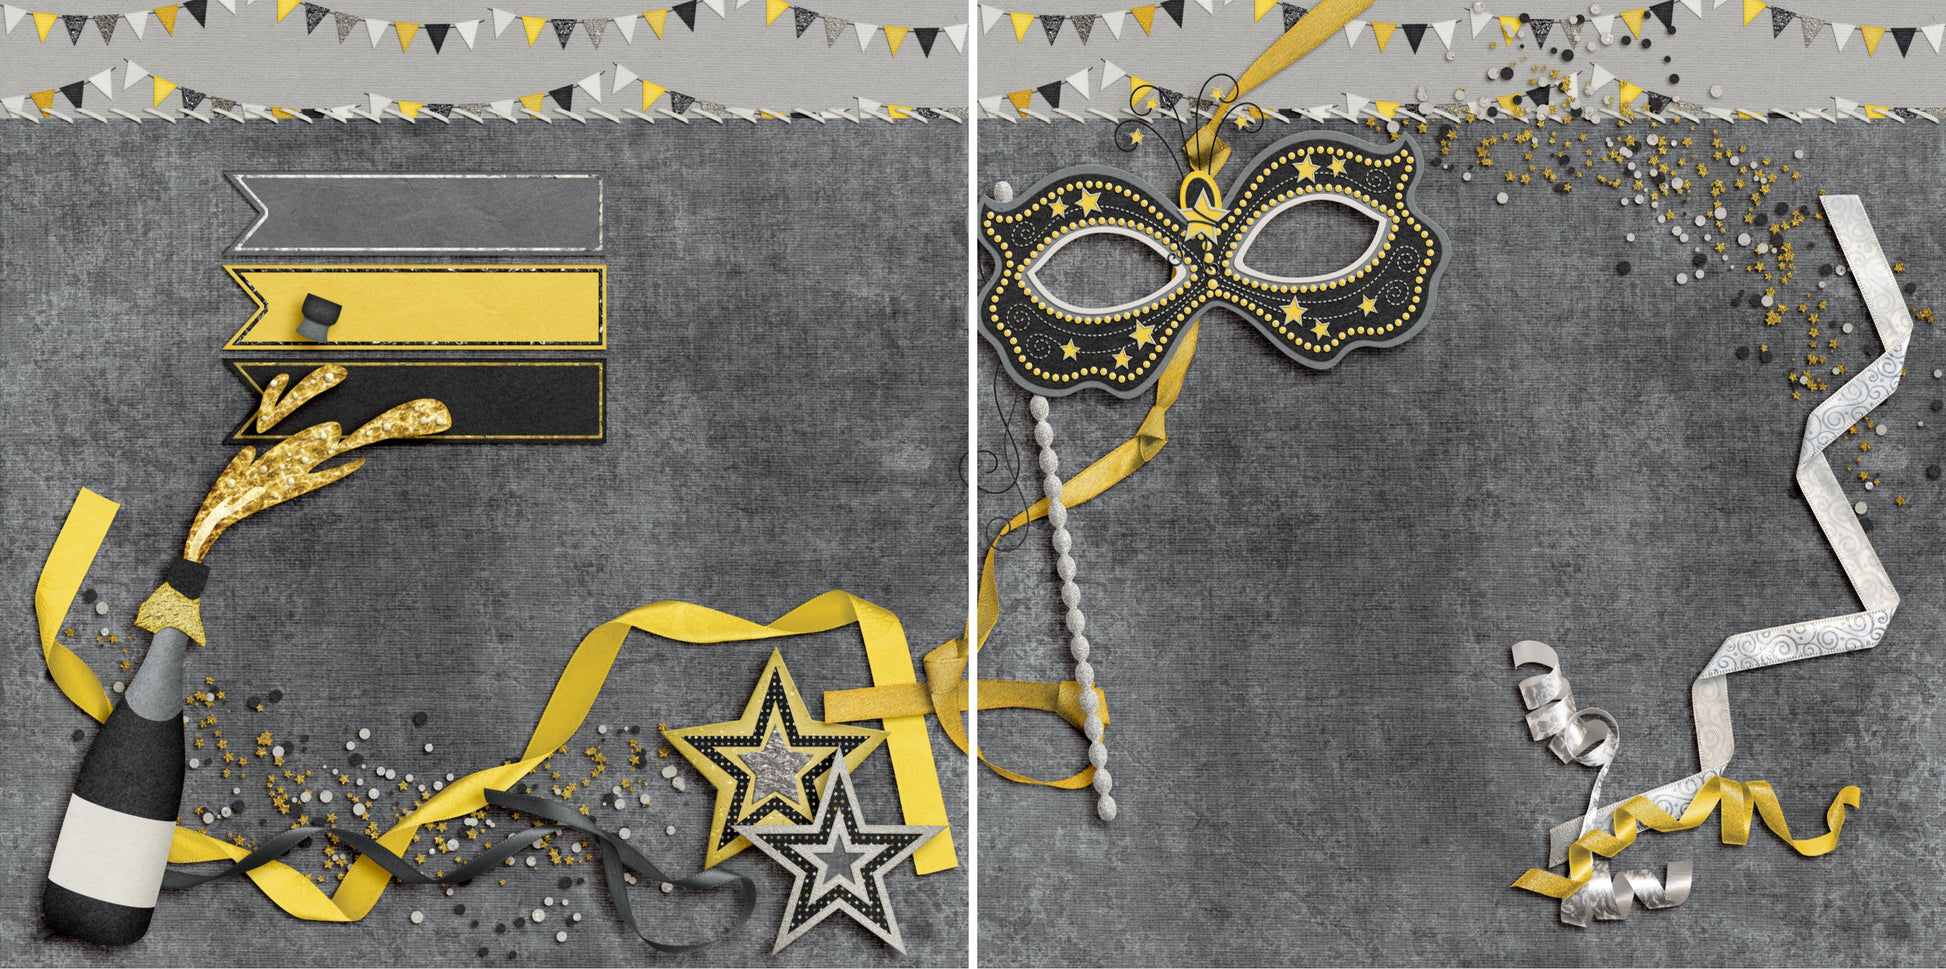 New Year's Party NPM - 4453 - EZscrapbooks Scrapbook Layouts New Year's